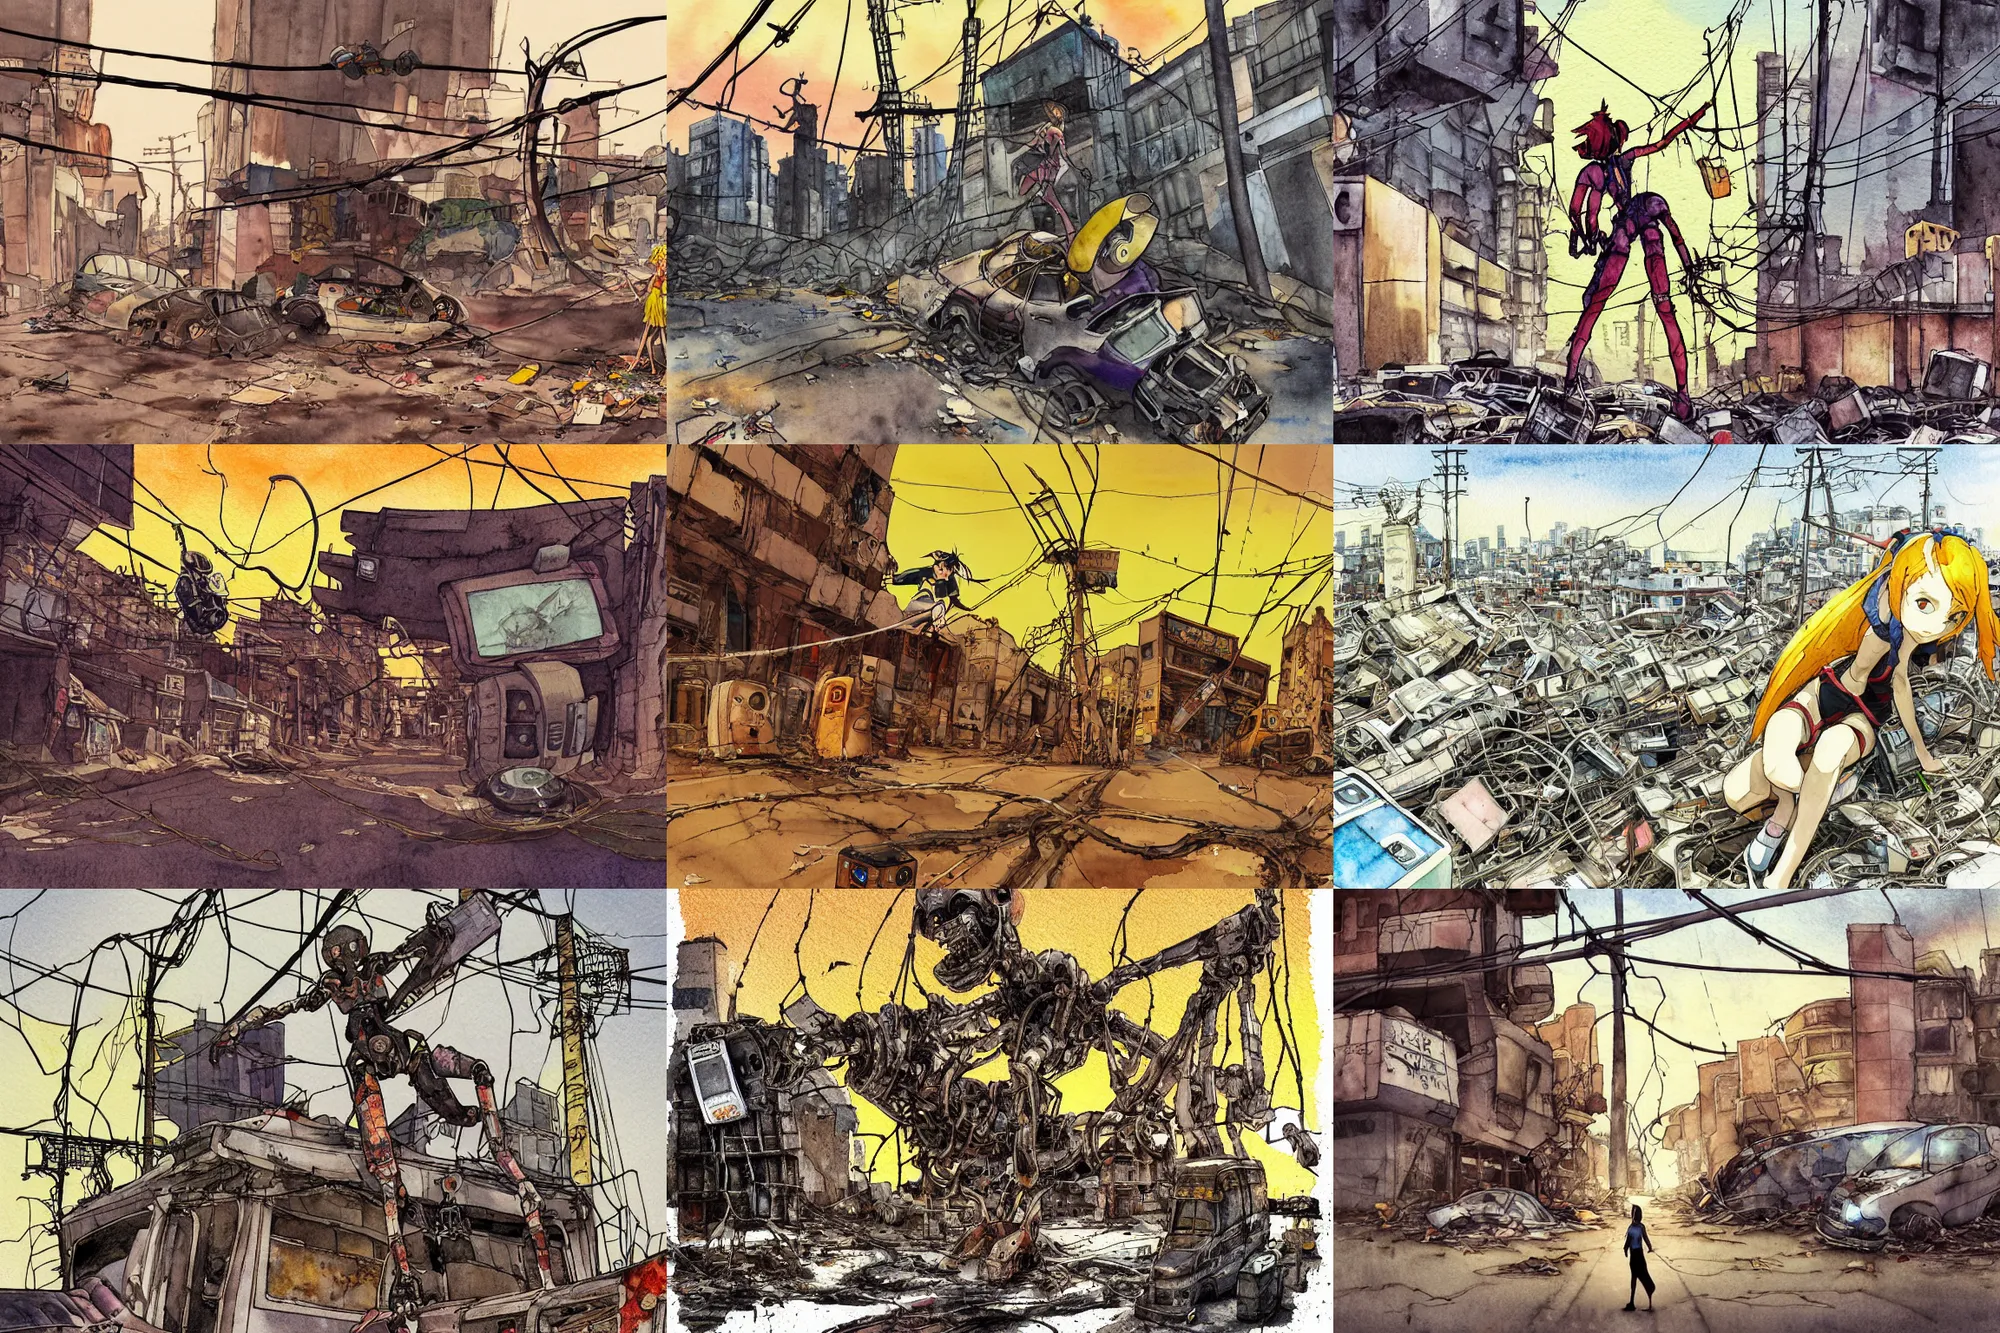 Prompt: detailed artwork, curvilinear, simple watercolor, harsh bloom lighting, rim light, abandoned city, drawn girl climbing a dead corpse rusty evangelion robot crashed in deserted dusty shinjuku junk town, tangled overhead wires, telephone pole, old pawn shop, broken tv, harsh shadows, pale yellow sky, bold graffiti